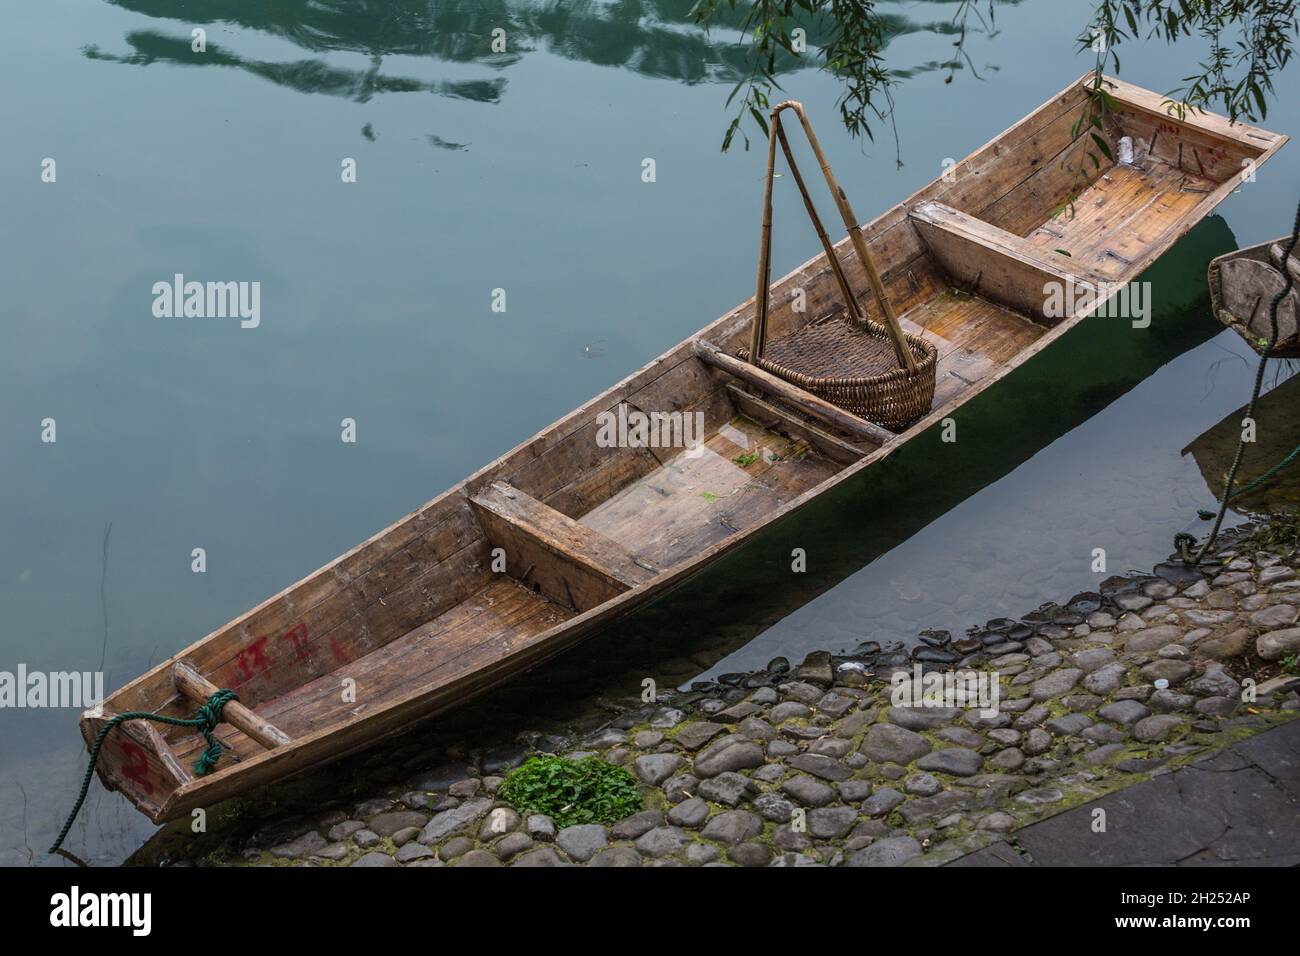 A traditional sampan tied up on  the Tuojiang River with a wicker basket scoop for cleaning the river. Fenghuang, China. Stock Photo